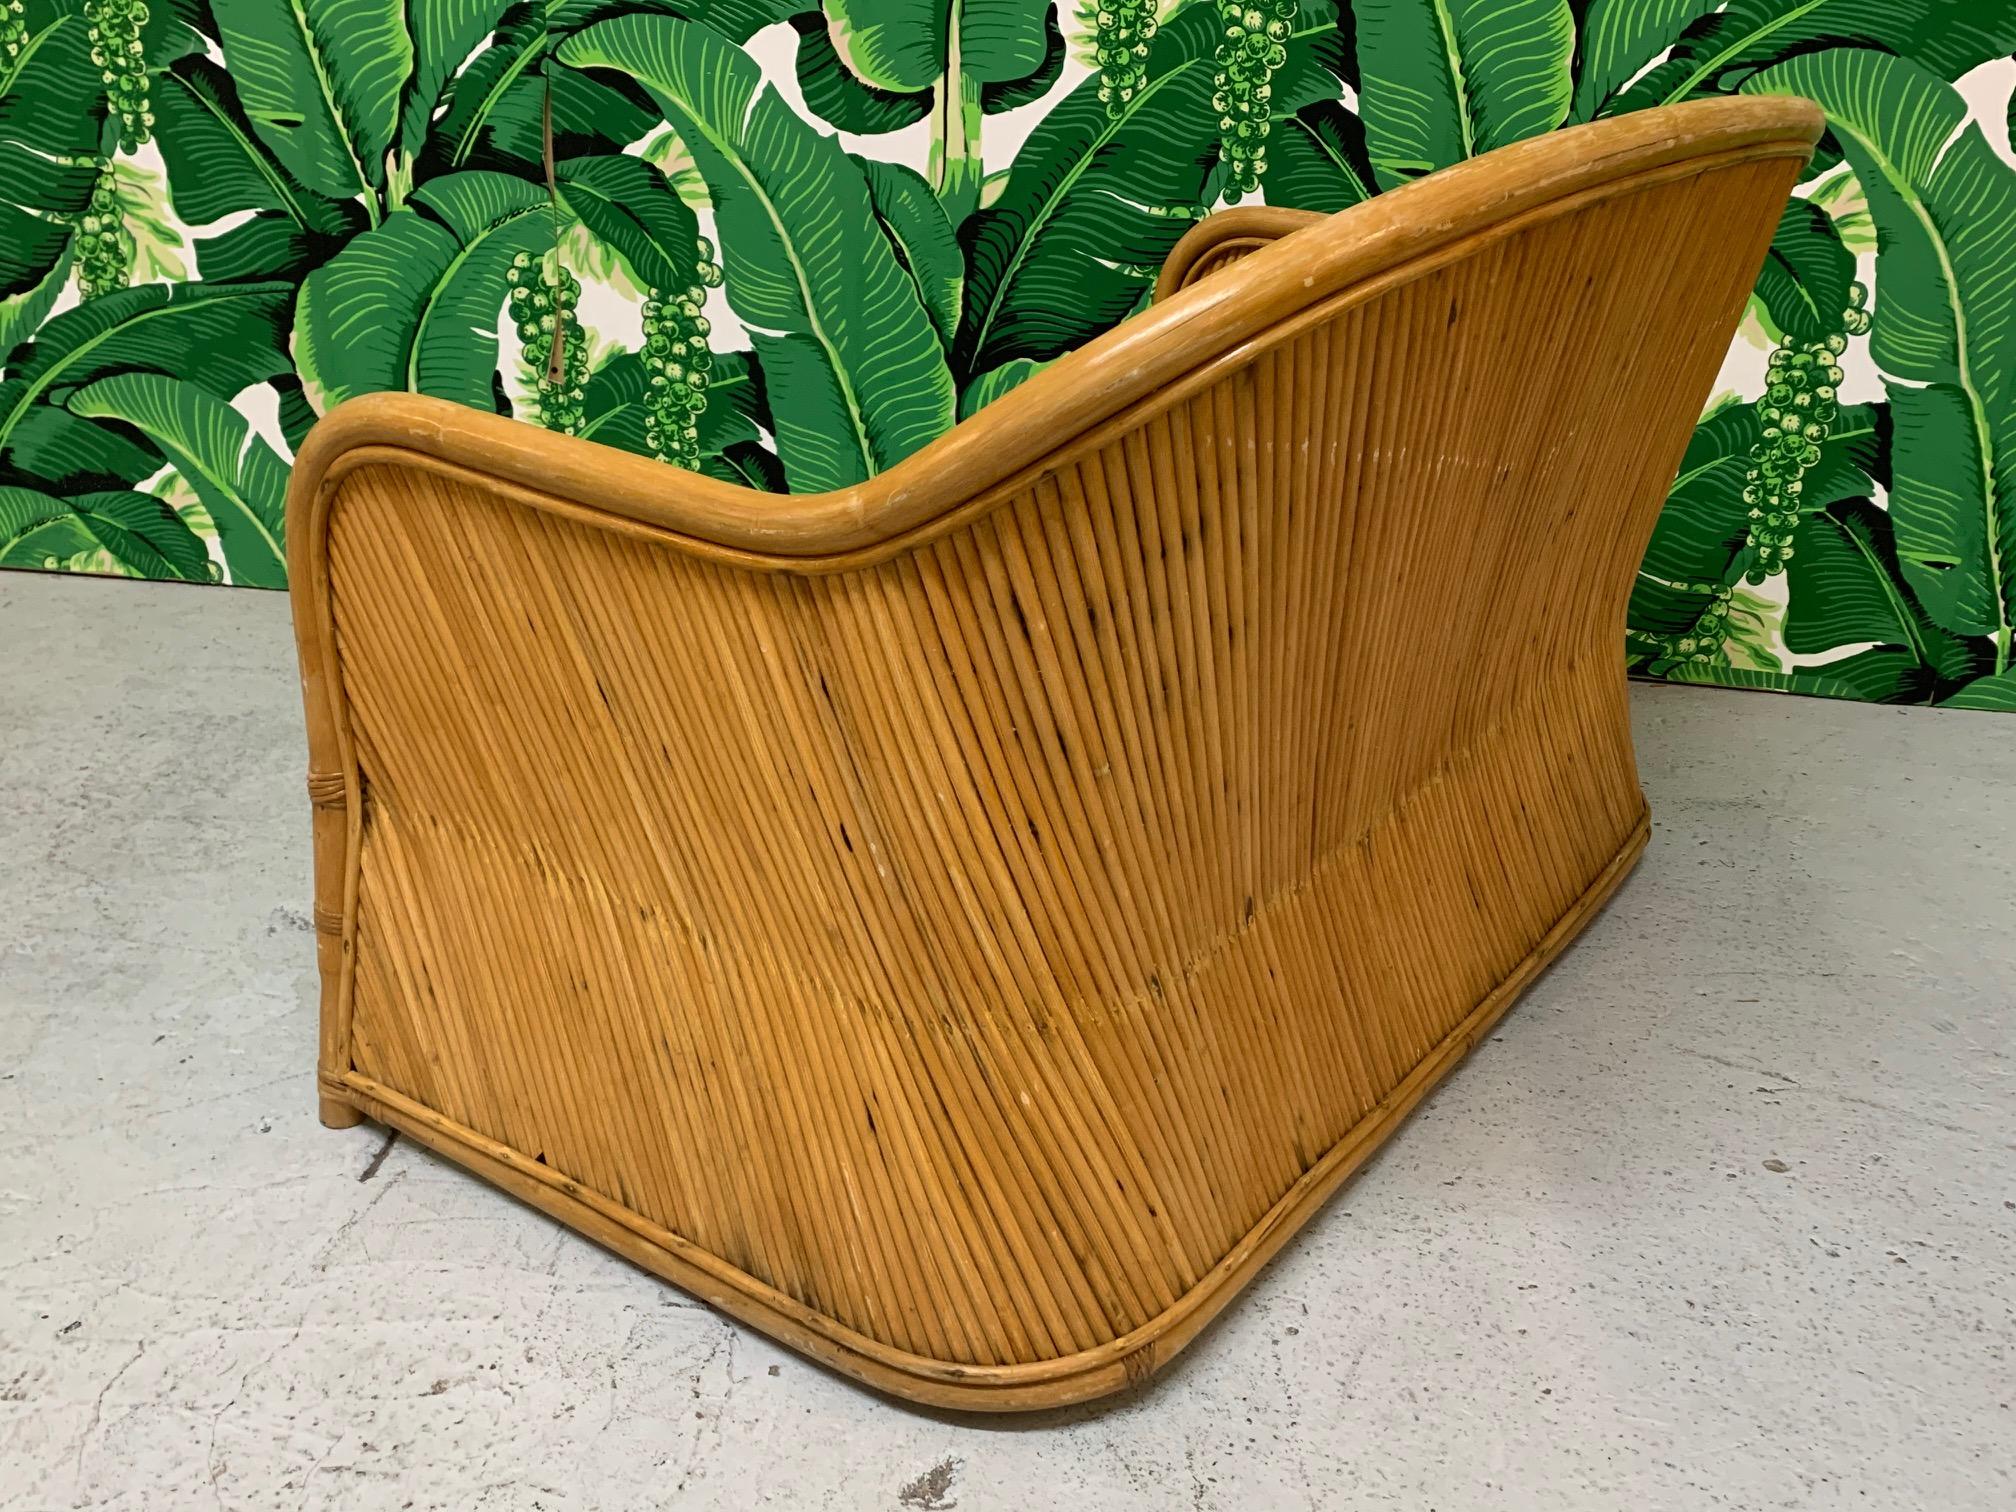 Fabulous split reed rattan wrapped loveseat. Interesting shape with diagonal reed design. Good condition with only minor imperfections consistent with age.